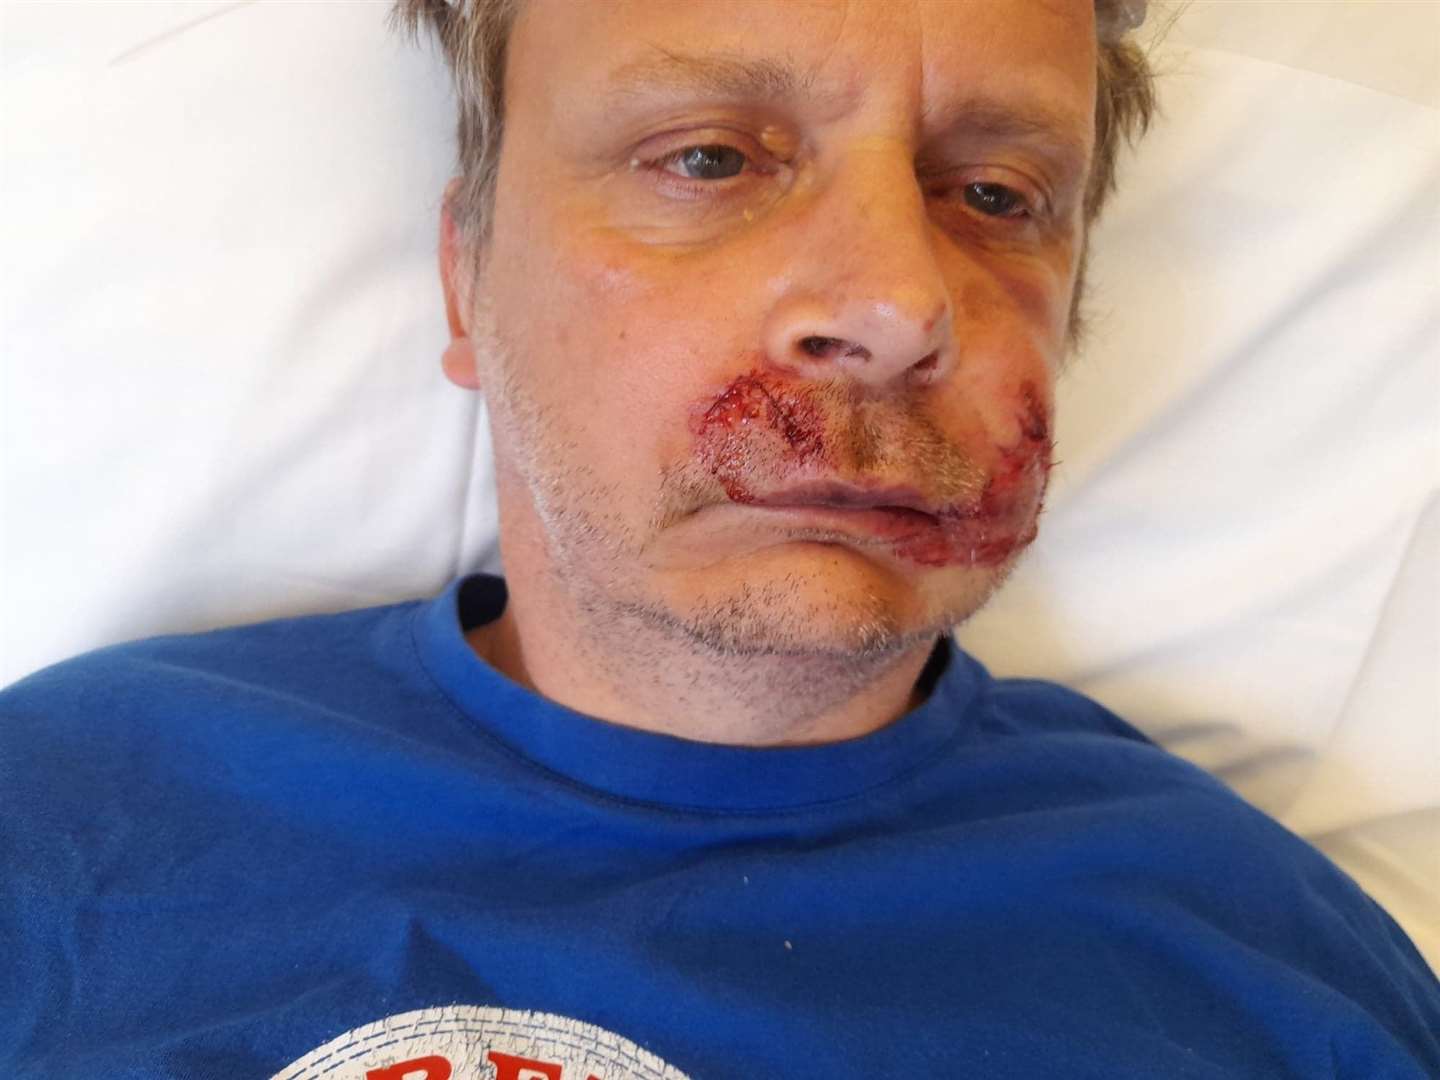 Steve was in hospital for five days following the attack. Picture: Steve Rowe